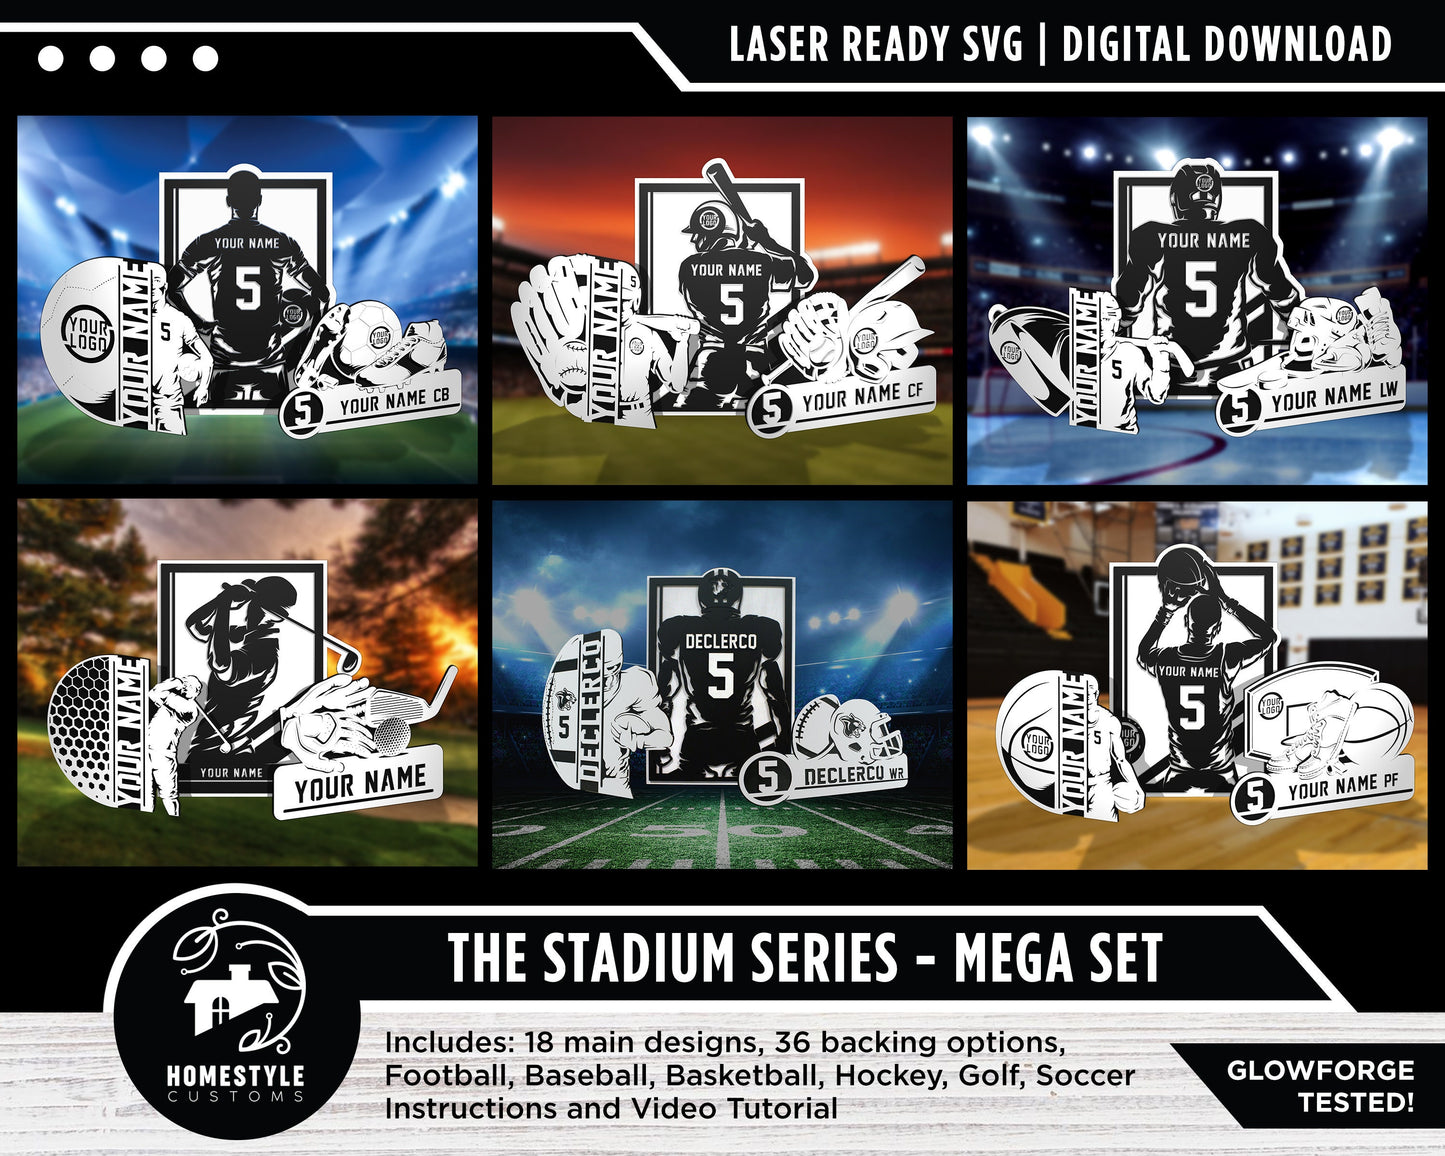 Stadium Series Sports Signage Mega Pack - 18 Designs, 3 of Each Sport - SVG File Download - Sized for Glowforge